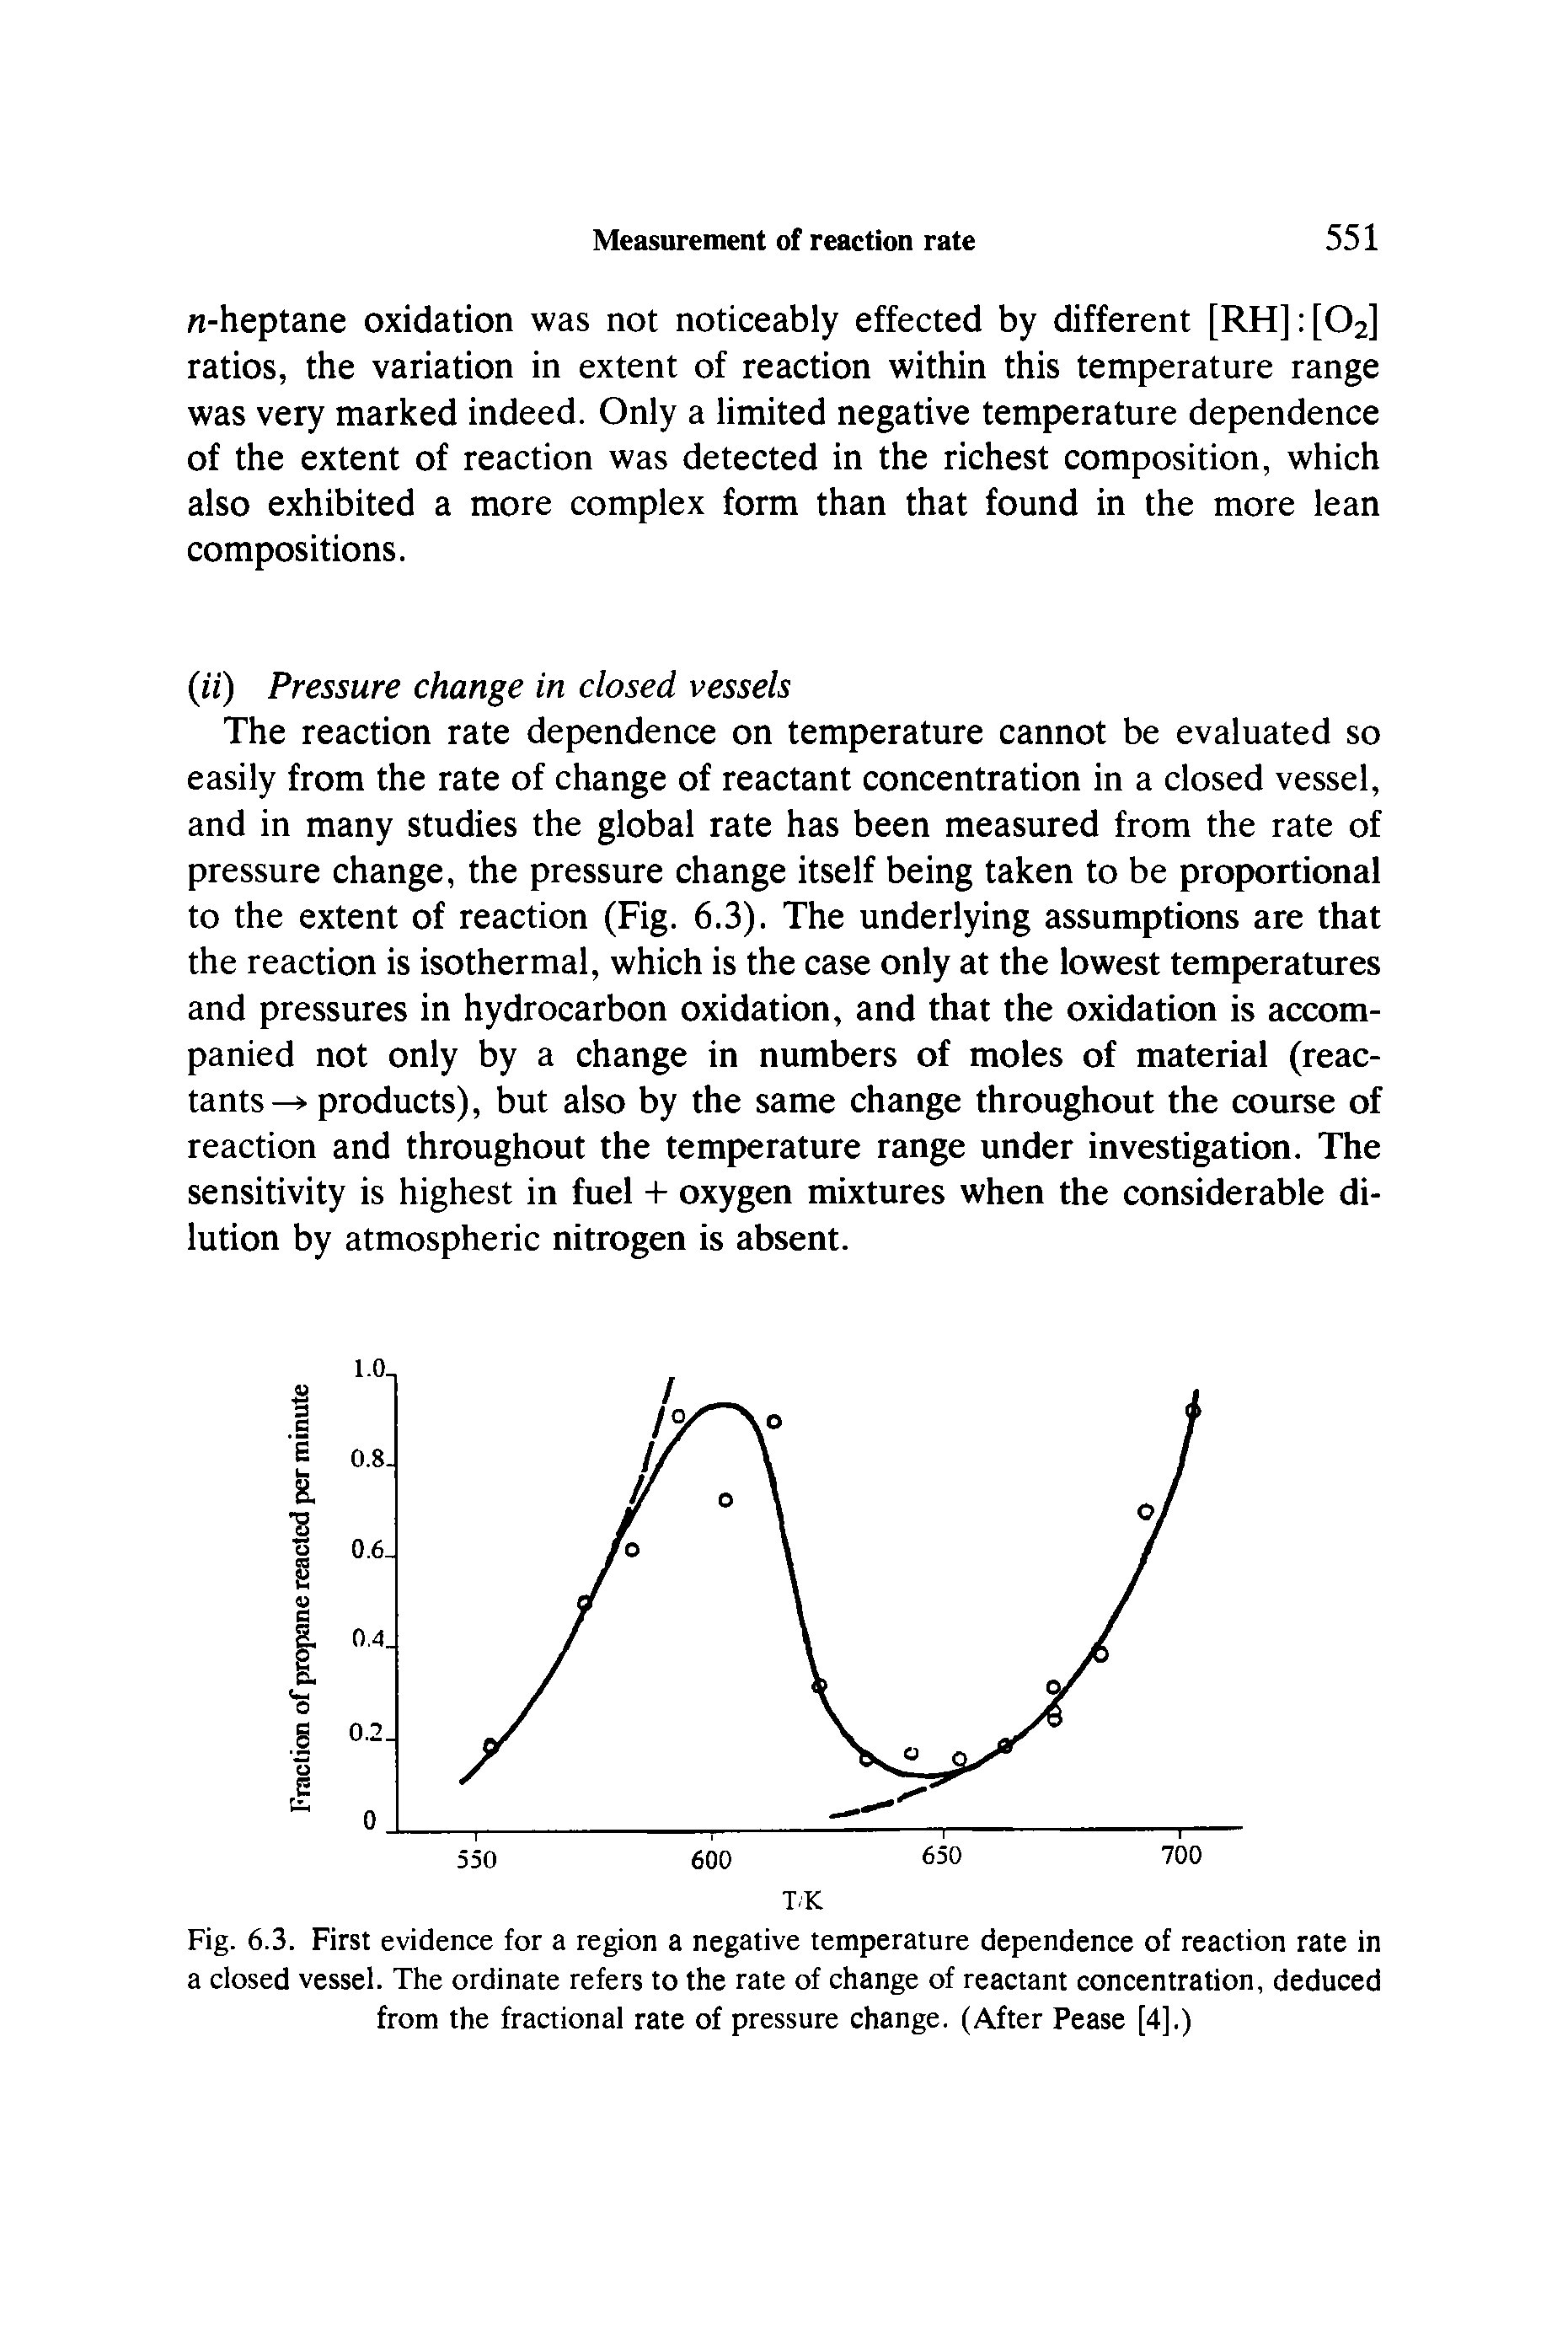 Fig. 6.3. First evidence for a region a negative temperature dependence of reaction rate in a closed vessel. The ordinate refers to the rate of change of reactant concentration, deduced from the fractional rate of pressure change. (After Pease [4].)...